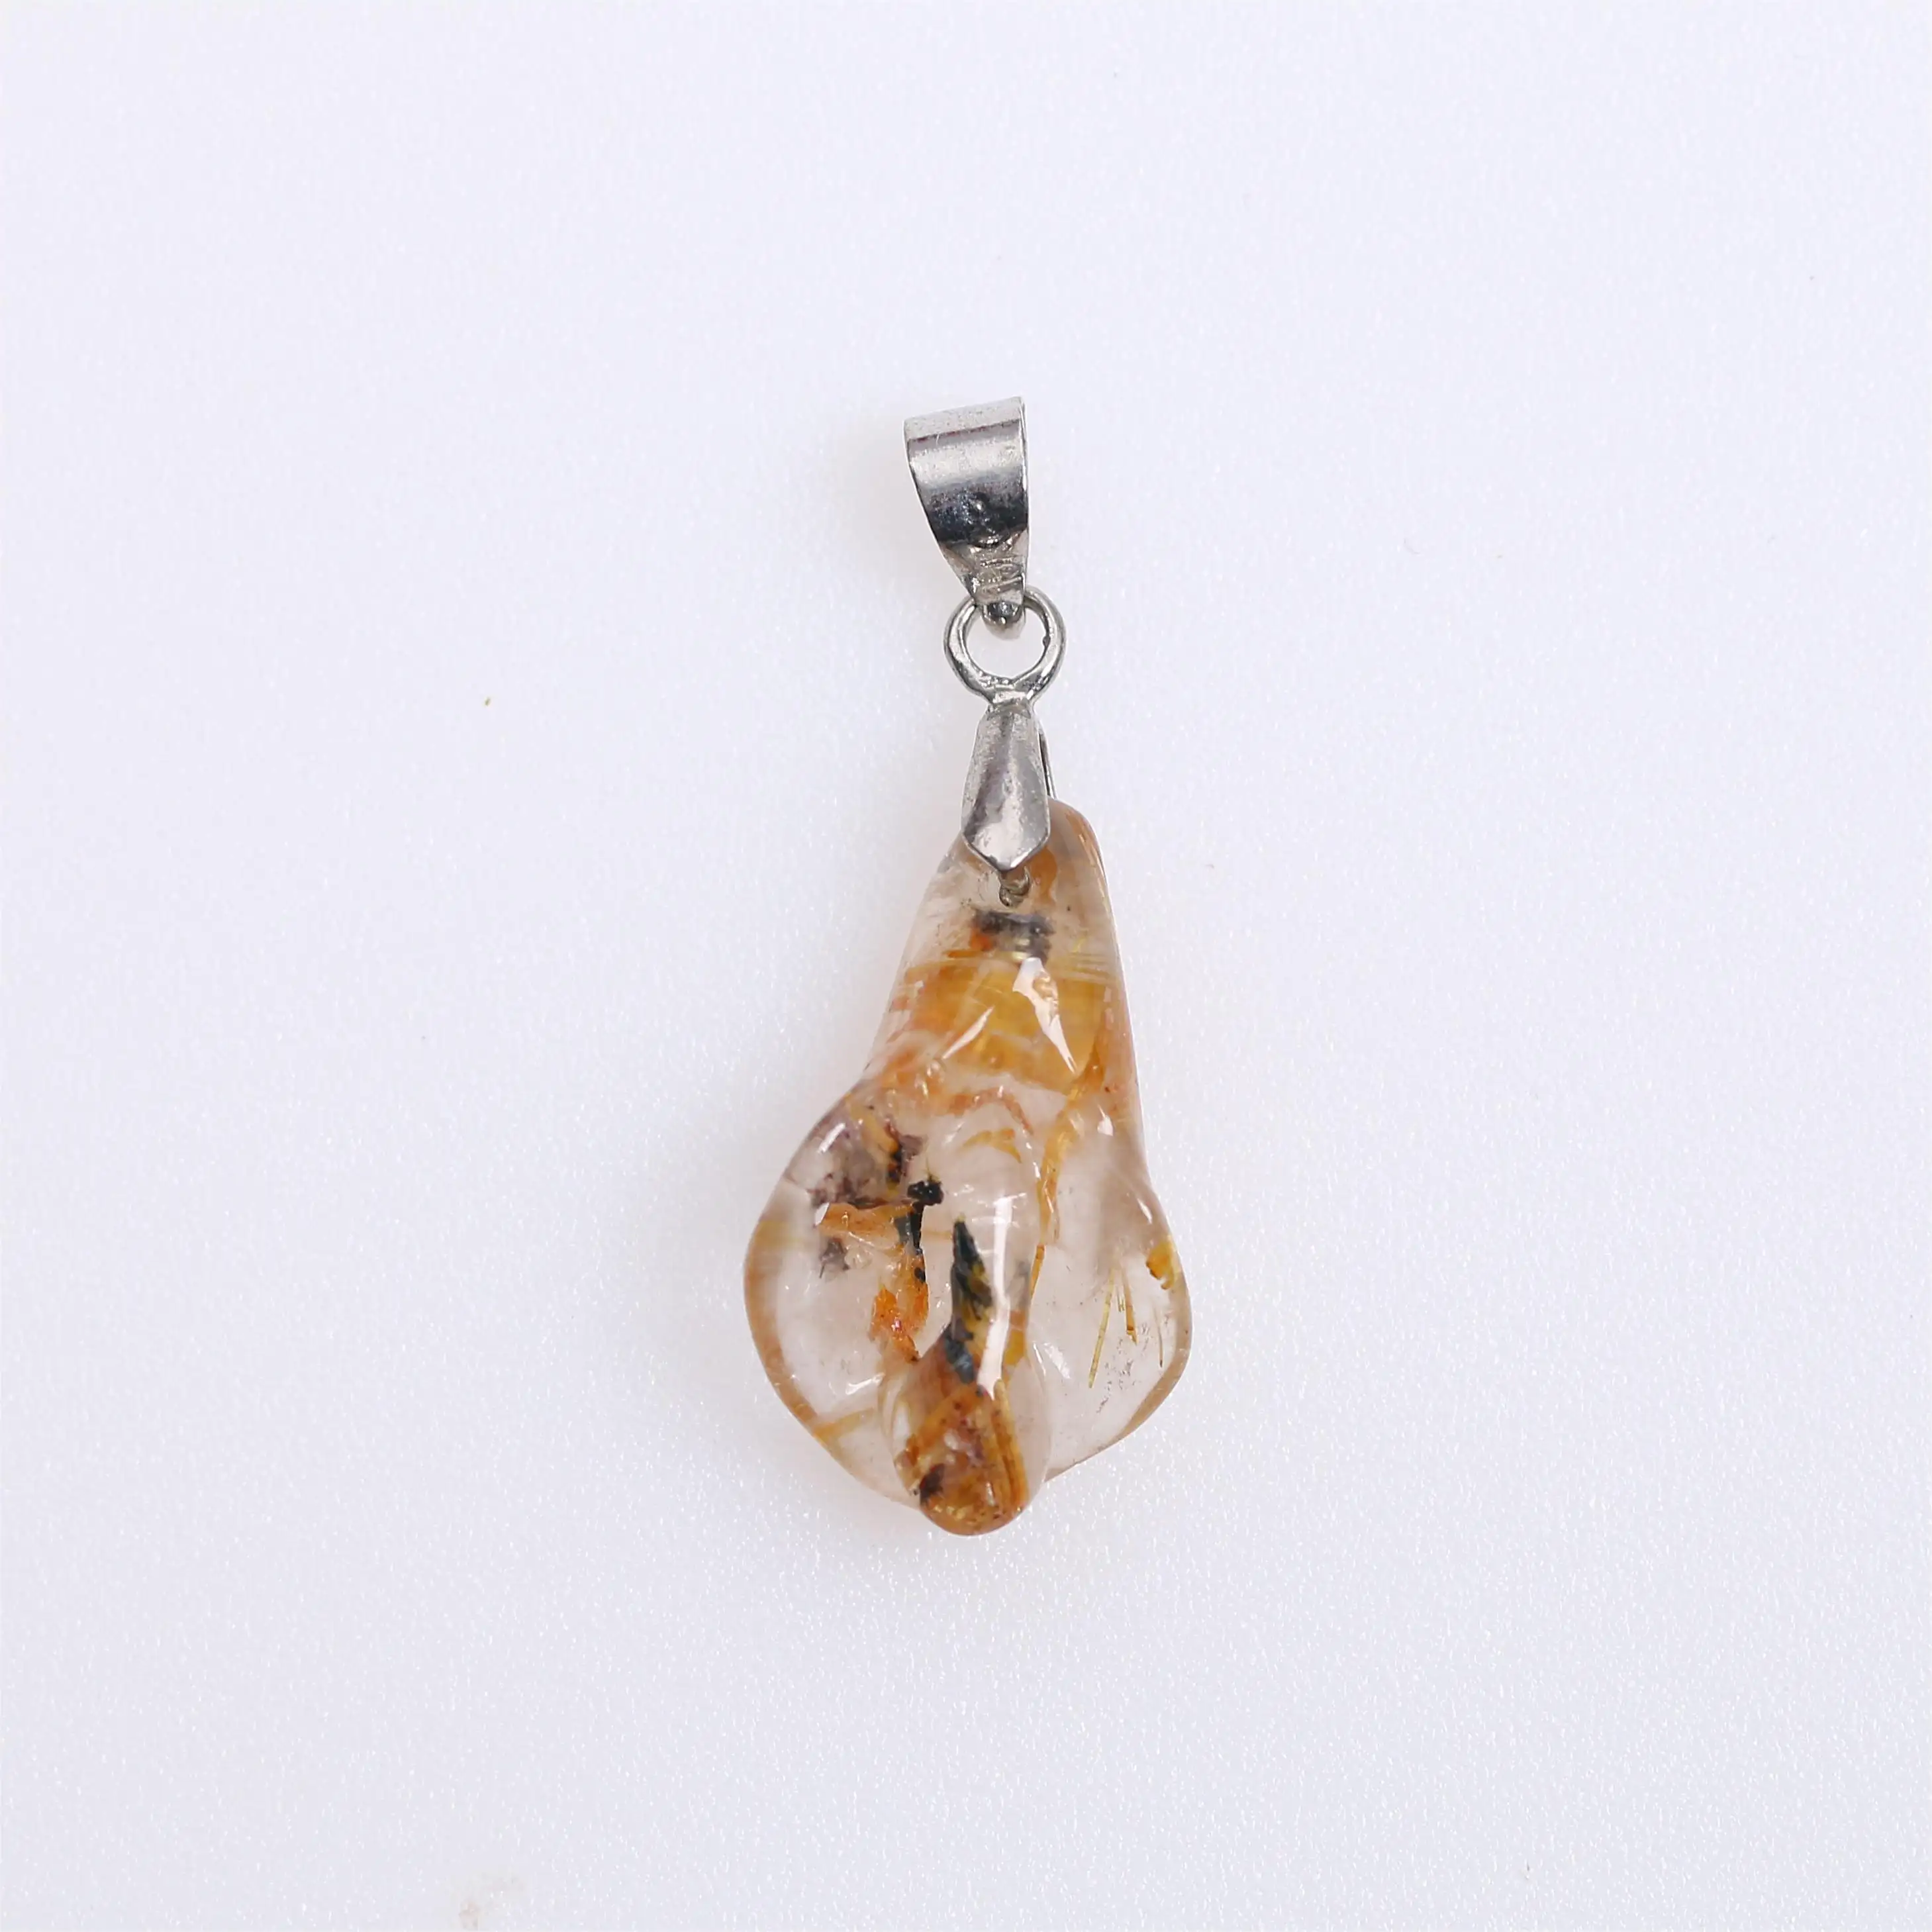 Best Selling Wholesale Gold Rutilated Quartz Gemstone Jewelry Chain Everyday Pendant For Women